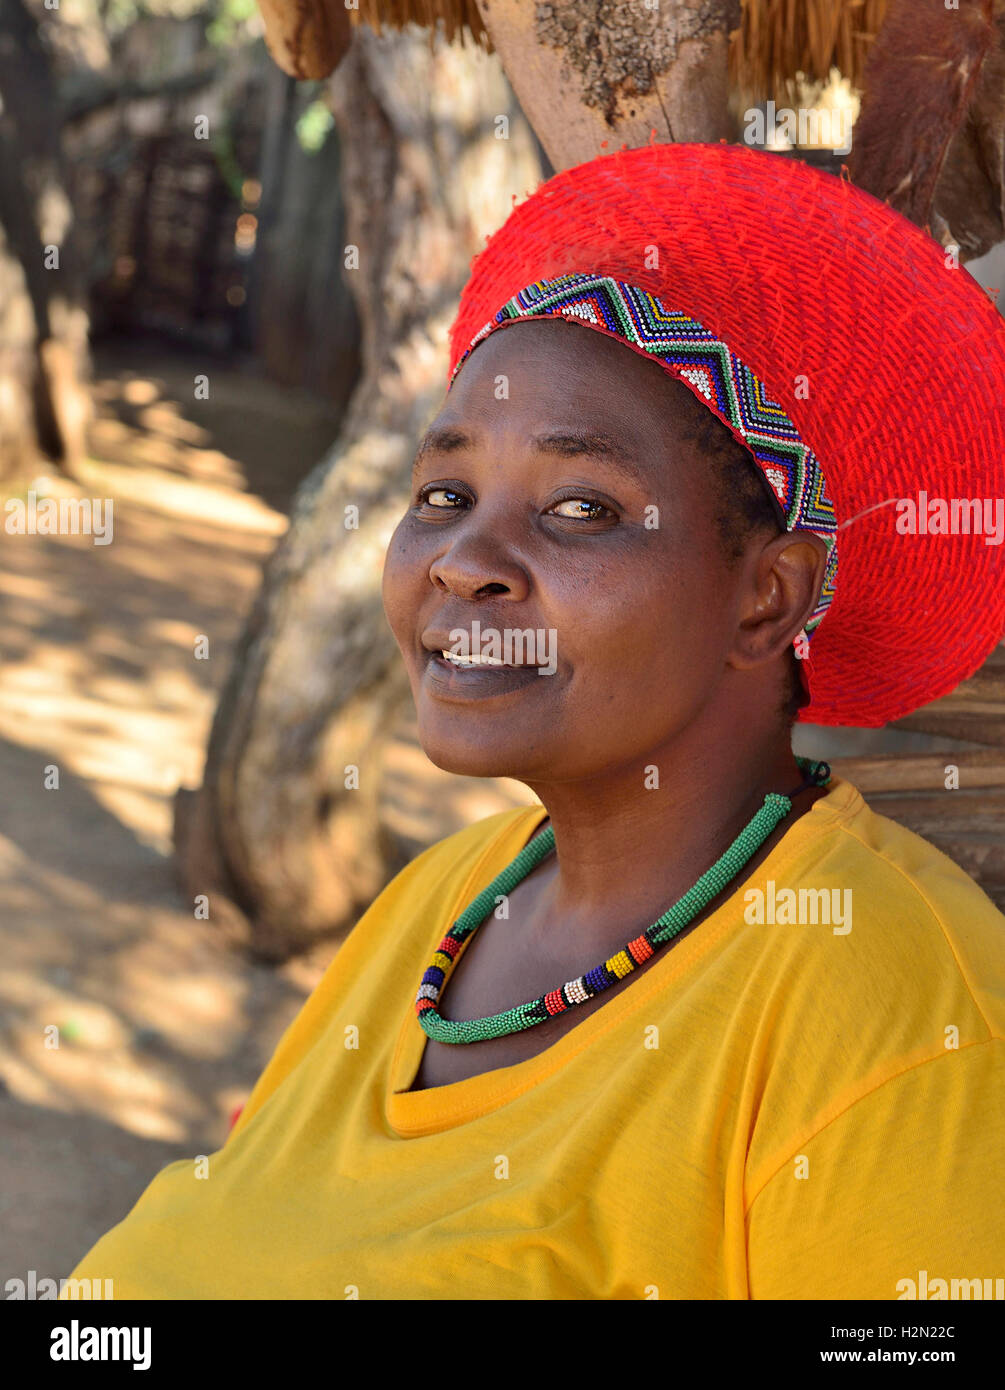 Shakaland Zulu lady troupe member poses in a traditional  Zulu hat at the Shakaland Cultural Village Stock Photo